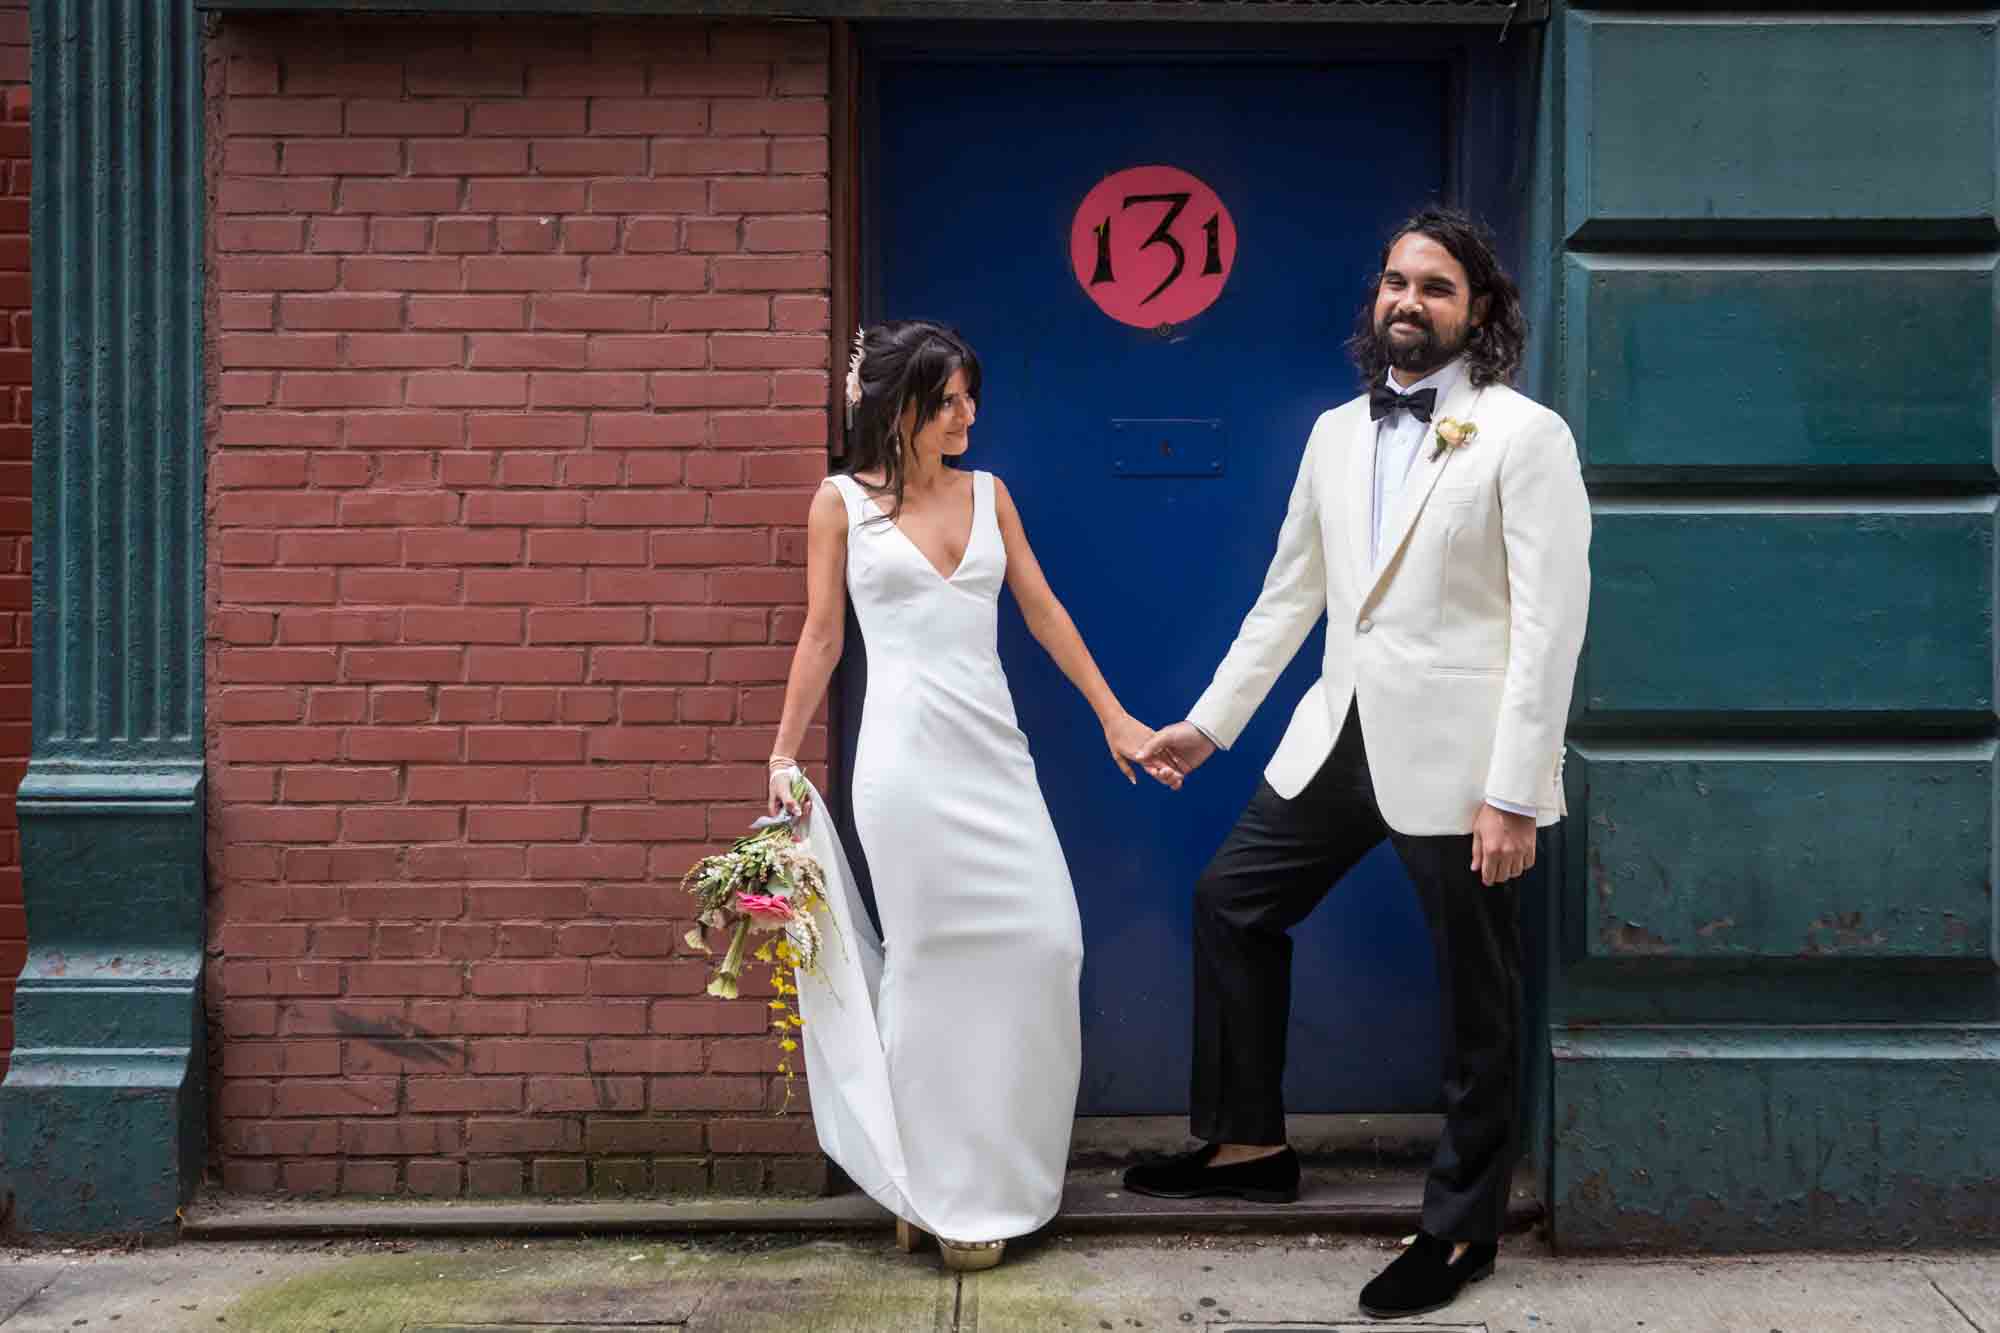 Bride and groom holding hands in front of blue door with number 131 in red circle